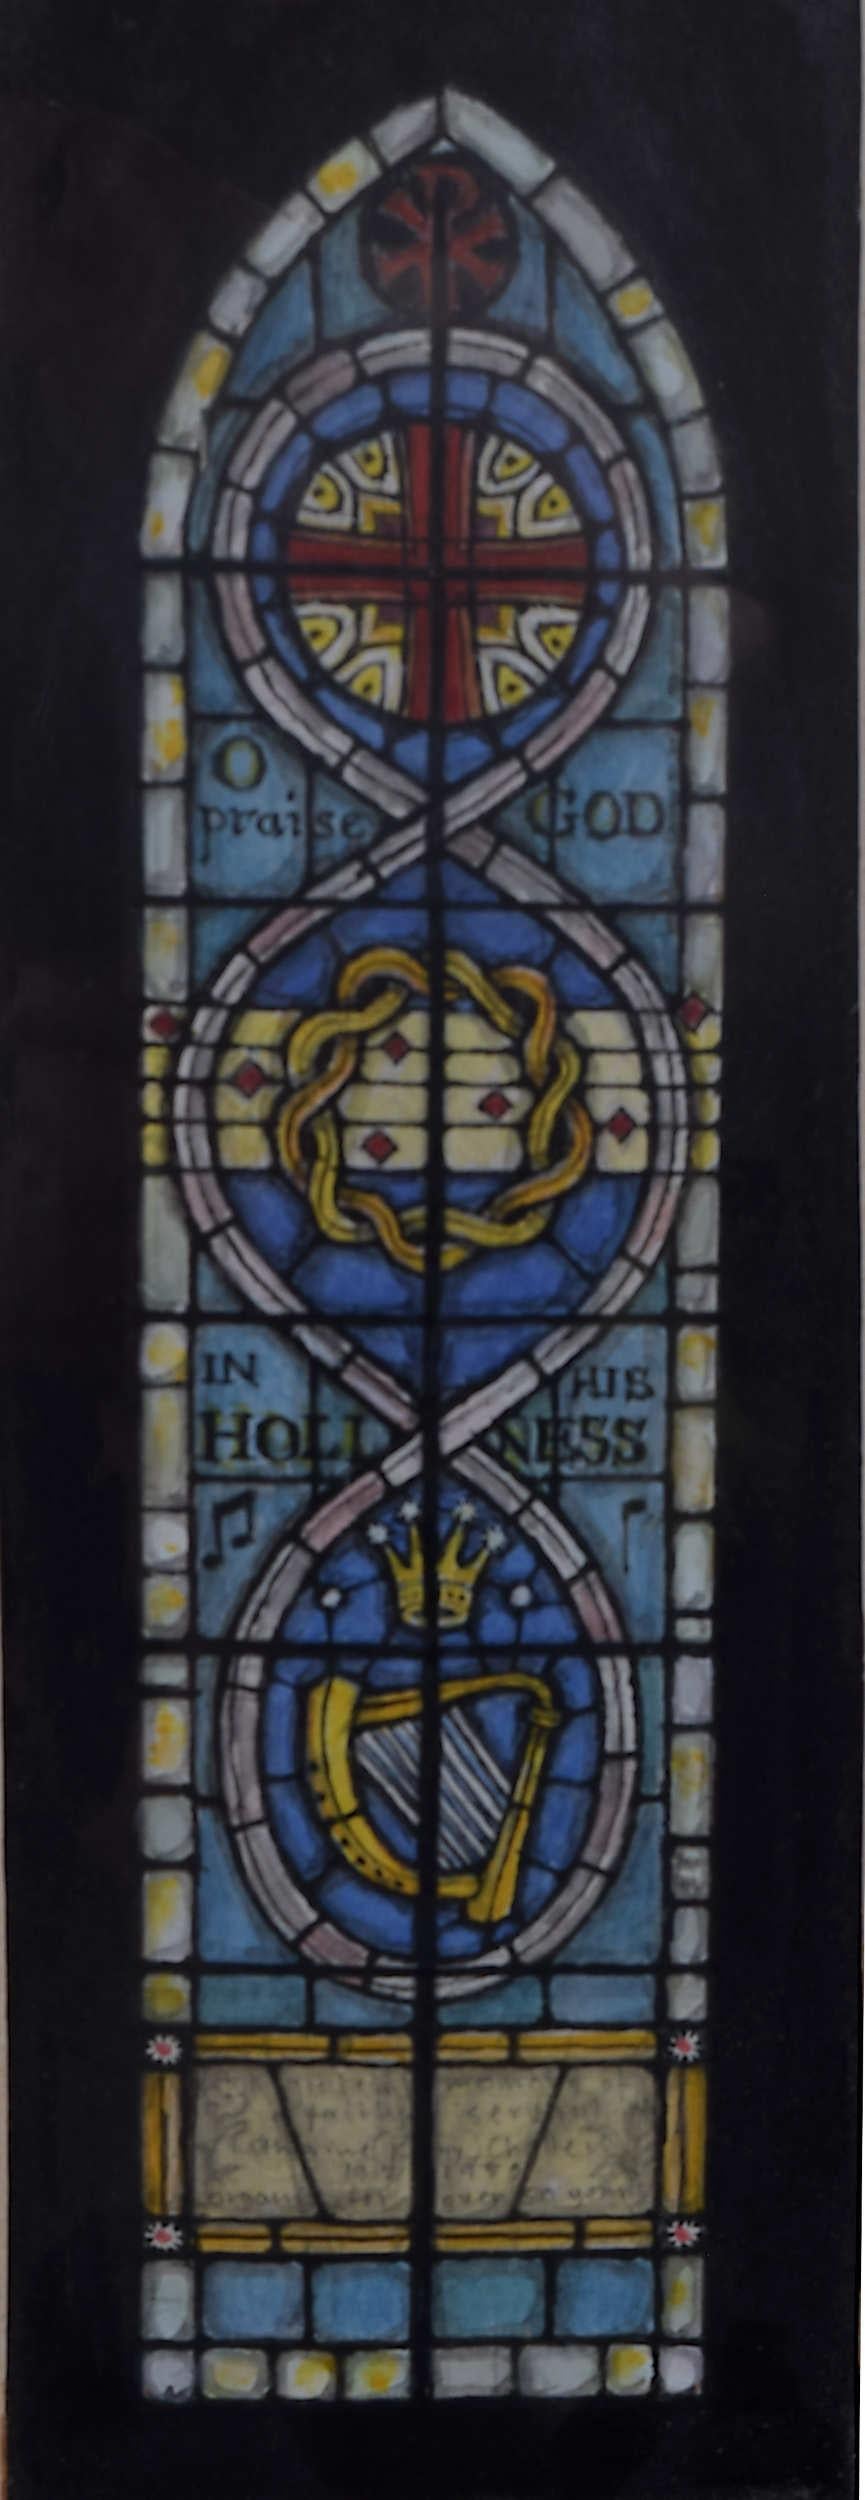 We acquired a series of watercolour stained glass designs from Jane Gray's studio. To find more scroll down to "More from this Seller" and below it click on "See all from this seller." 

Jane Gray (b.1931)
Stained Glass Design
Watercolour
18 x 6